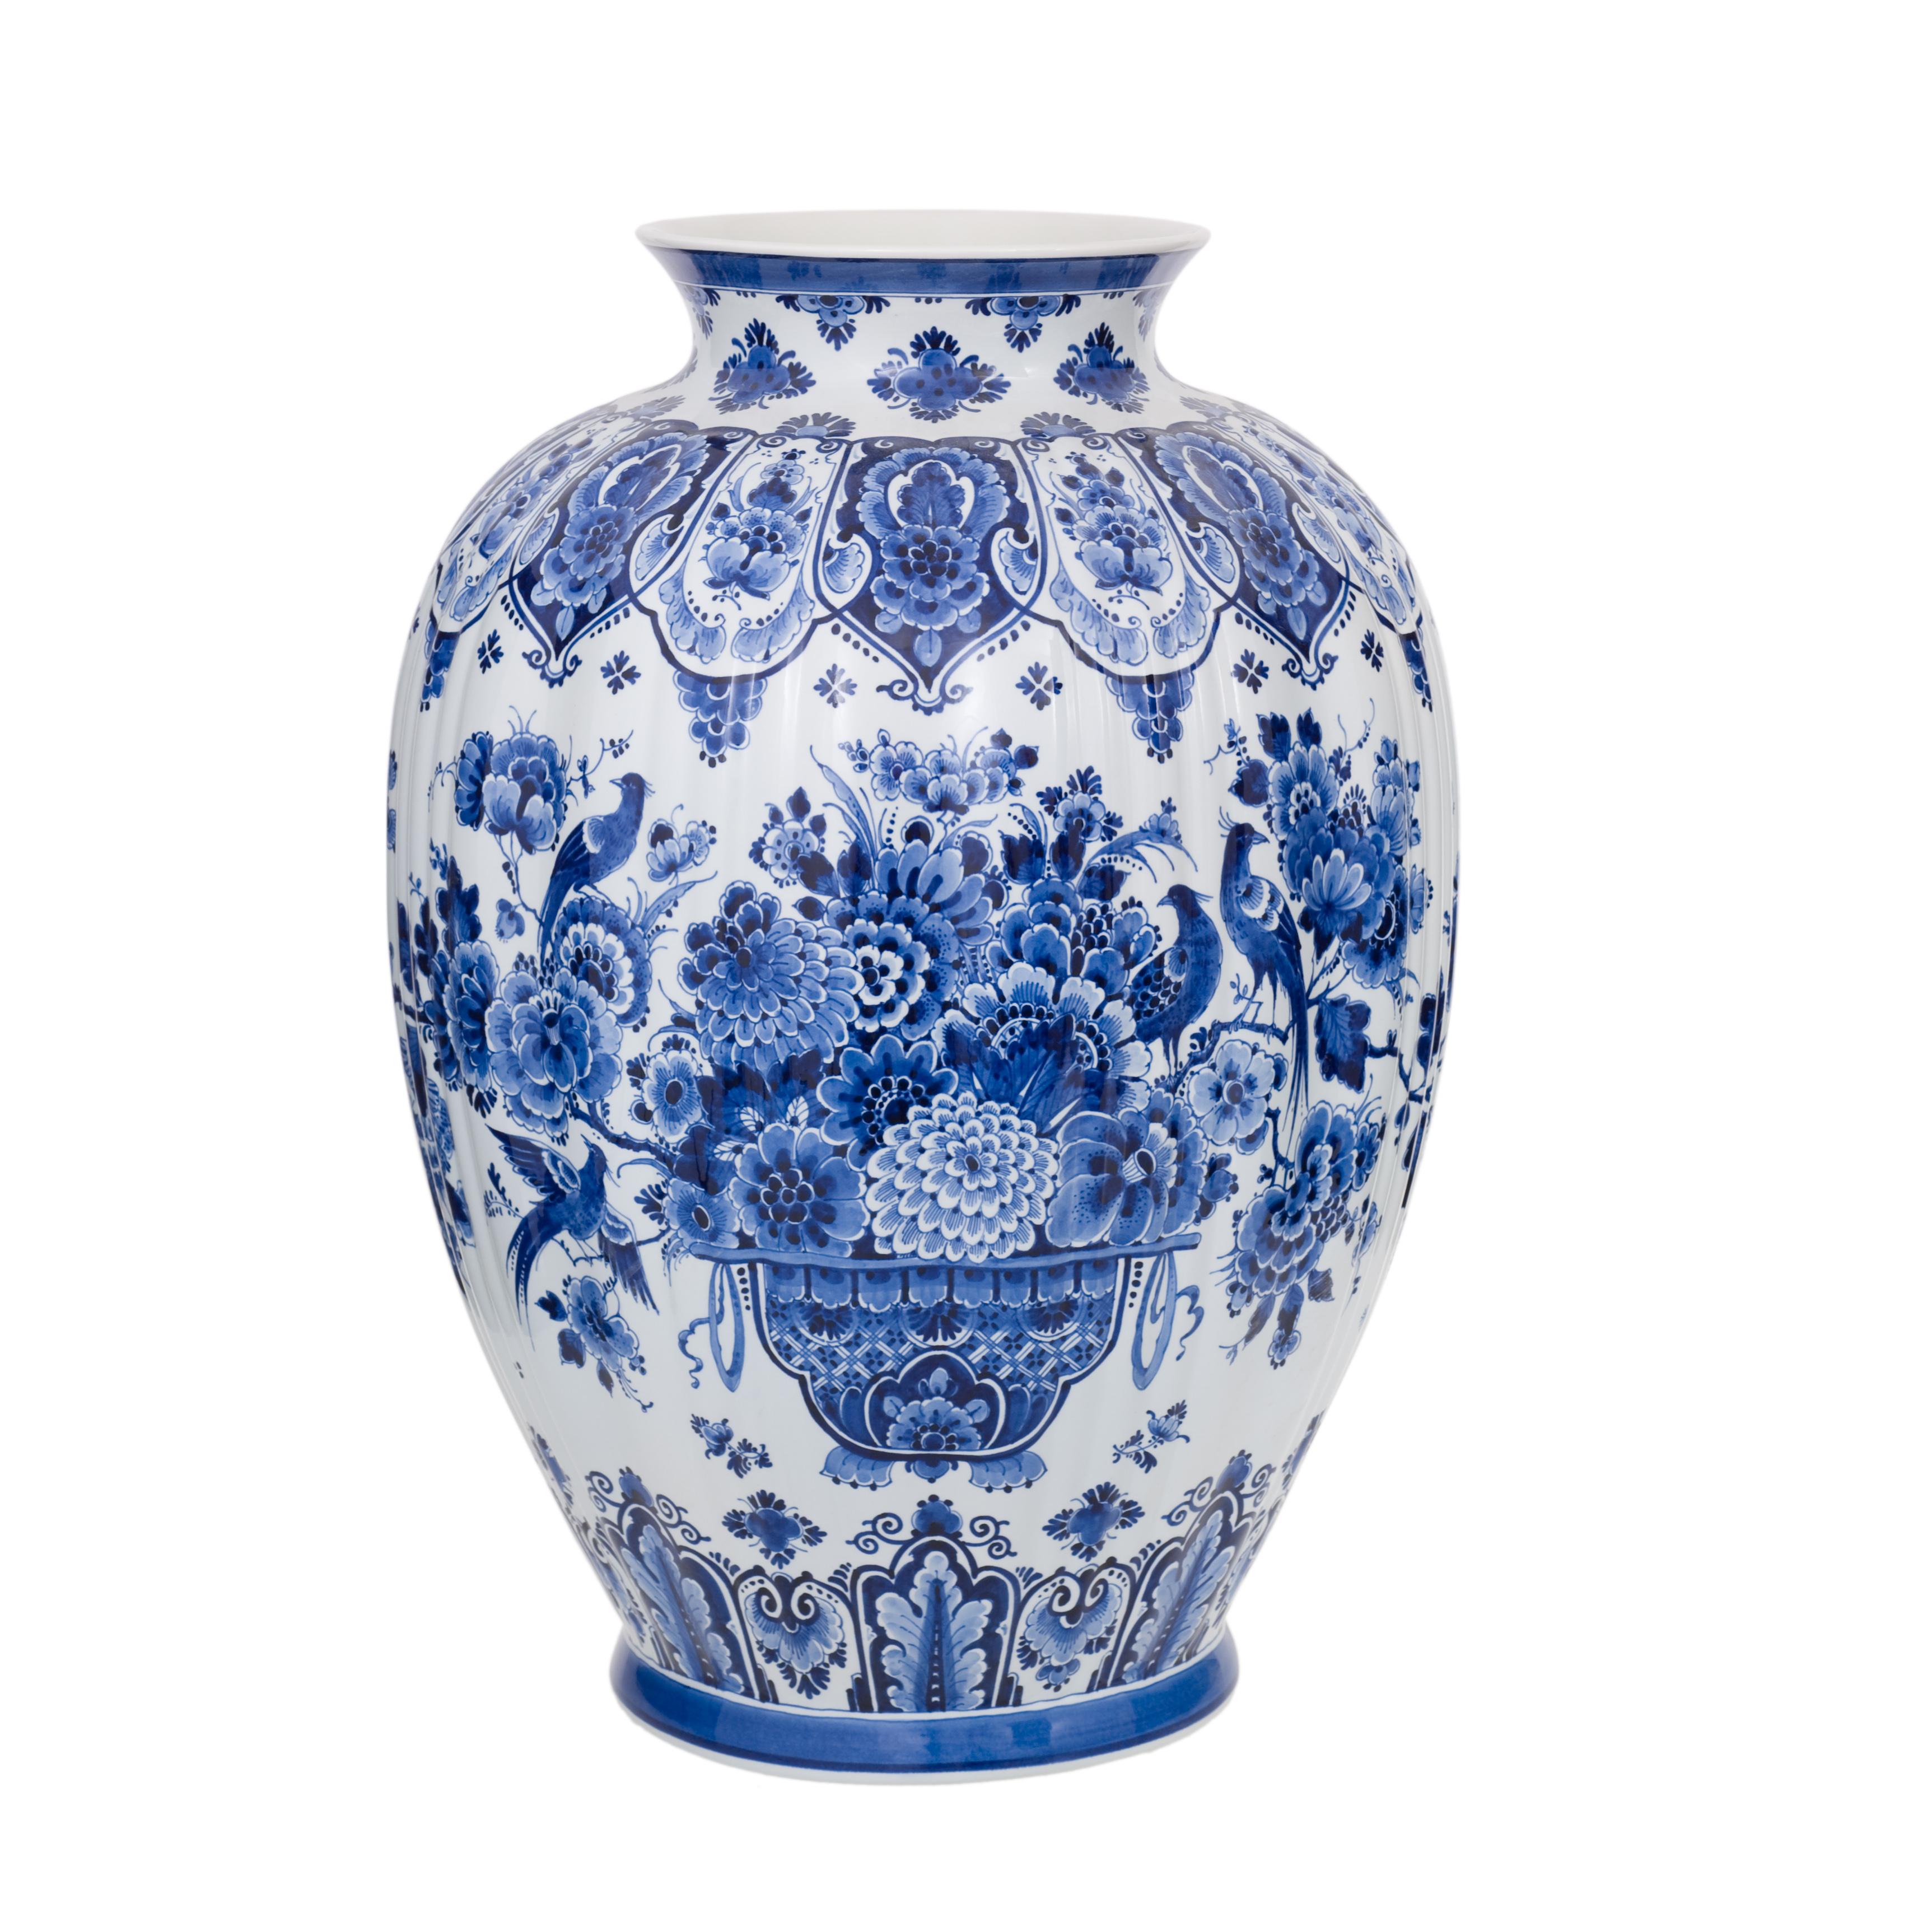 Exclusively hand made in the atelier of Royal Delft in The Netherlands. This vase is hand painted by one of the master painters of Royal Delft. The vase is richly decorated with floral basket and birds motif in original Delft Blue colour. The size